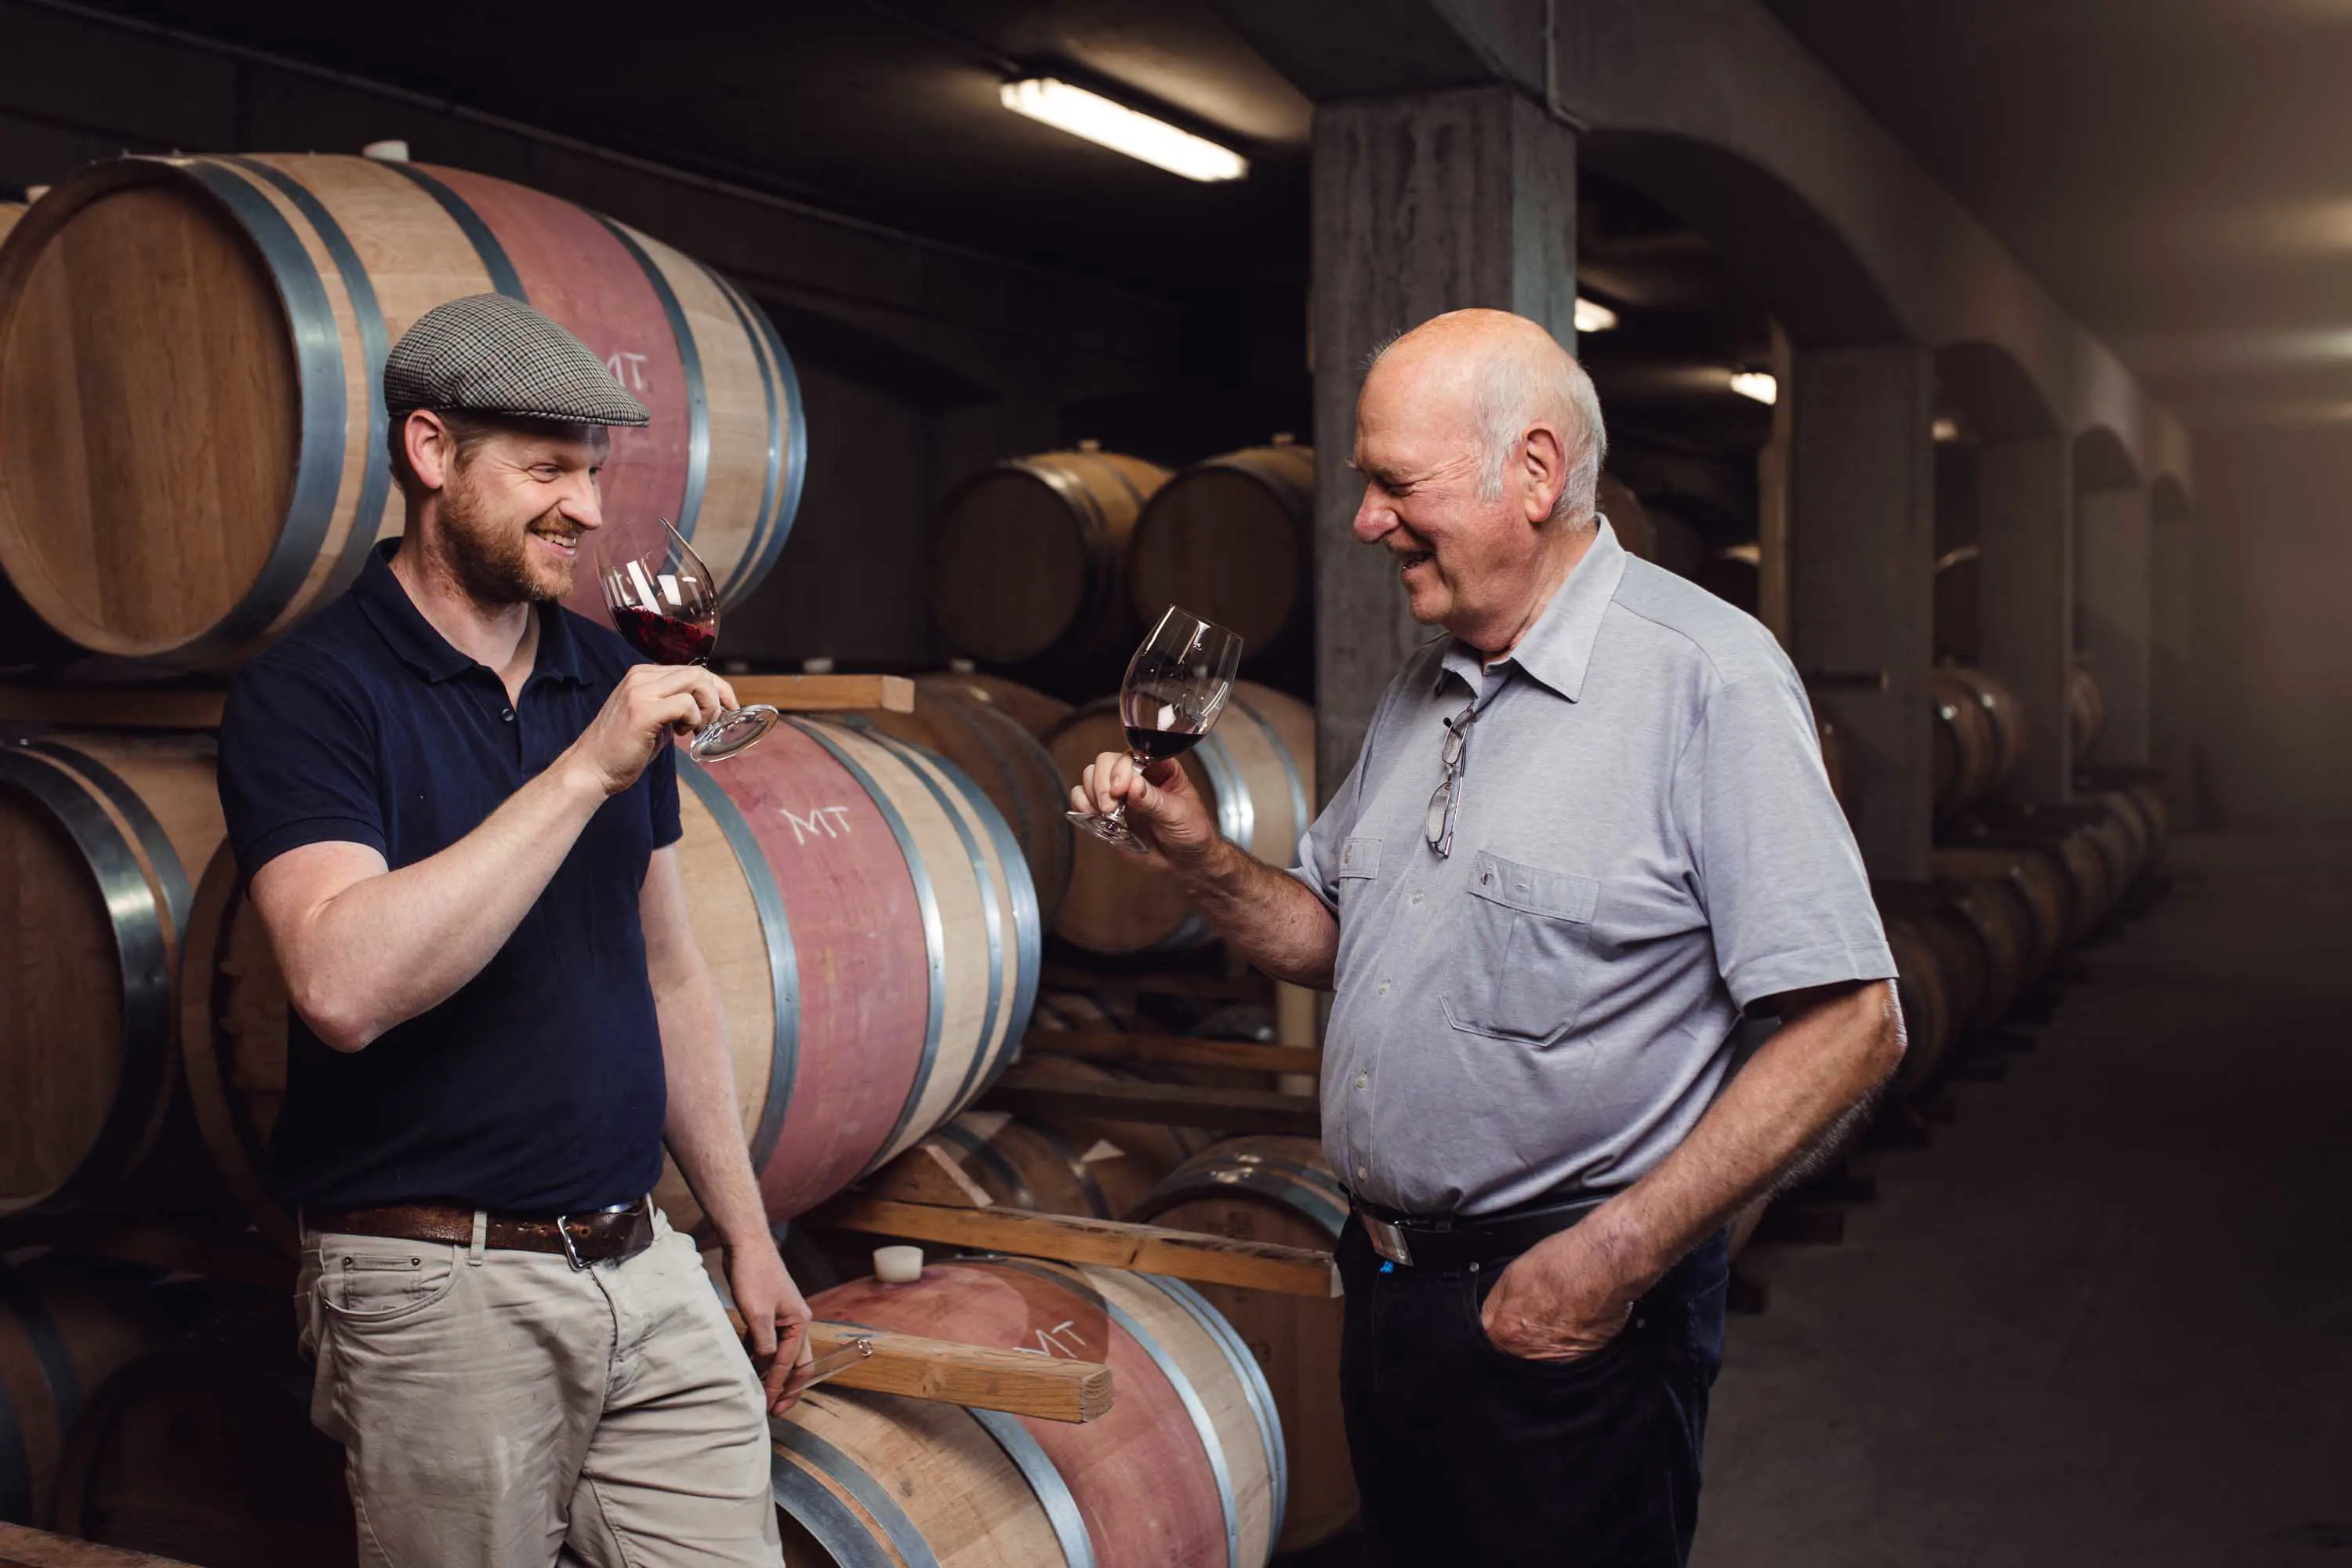 A young man wearing a flat cap and an older man in a buttoned shirt drink wine, standing in front of barrels stacked up in a concrete warehouse.